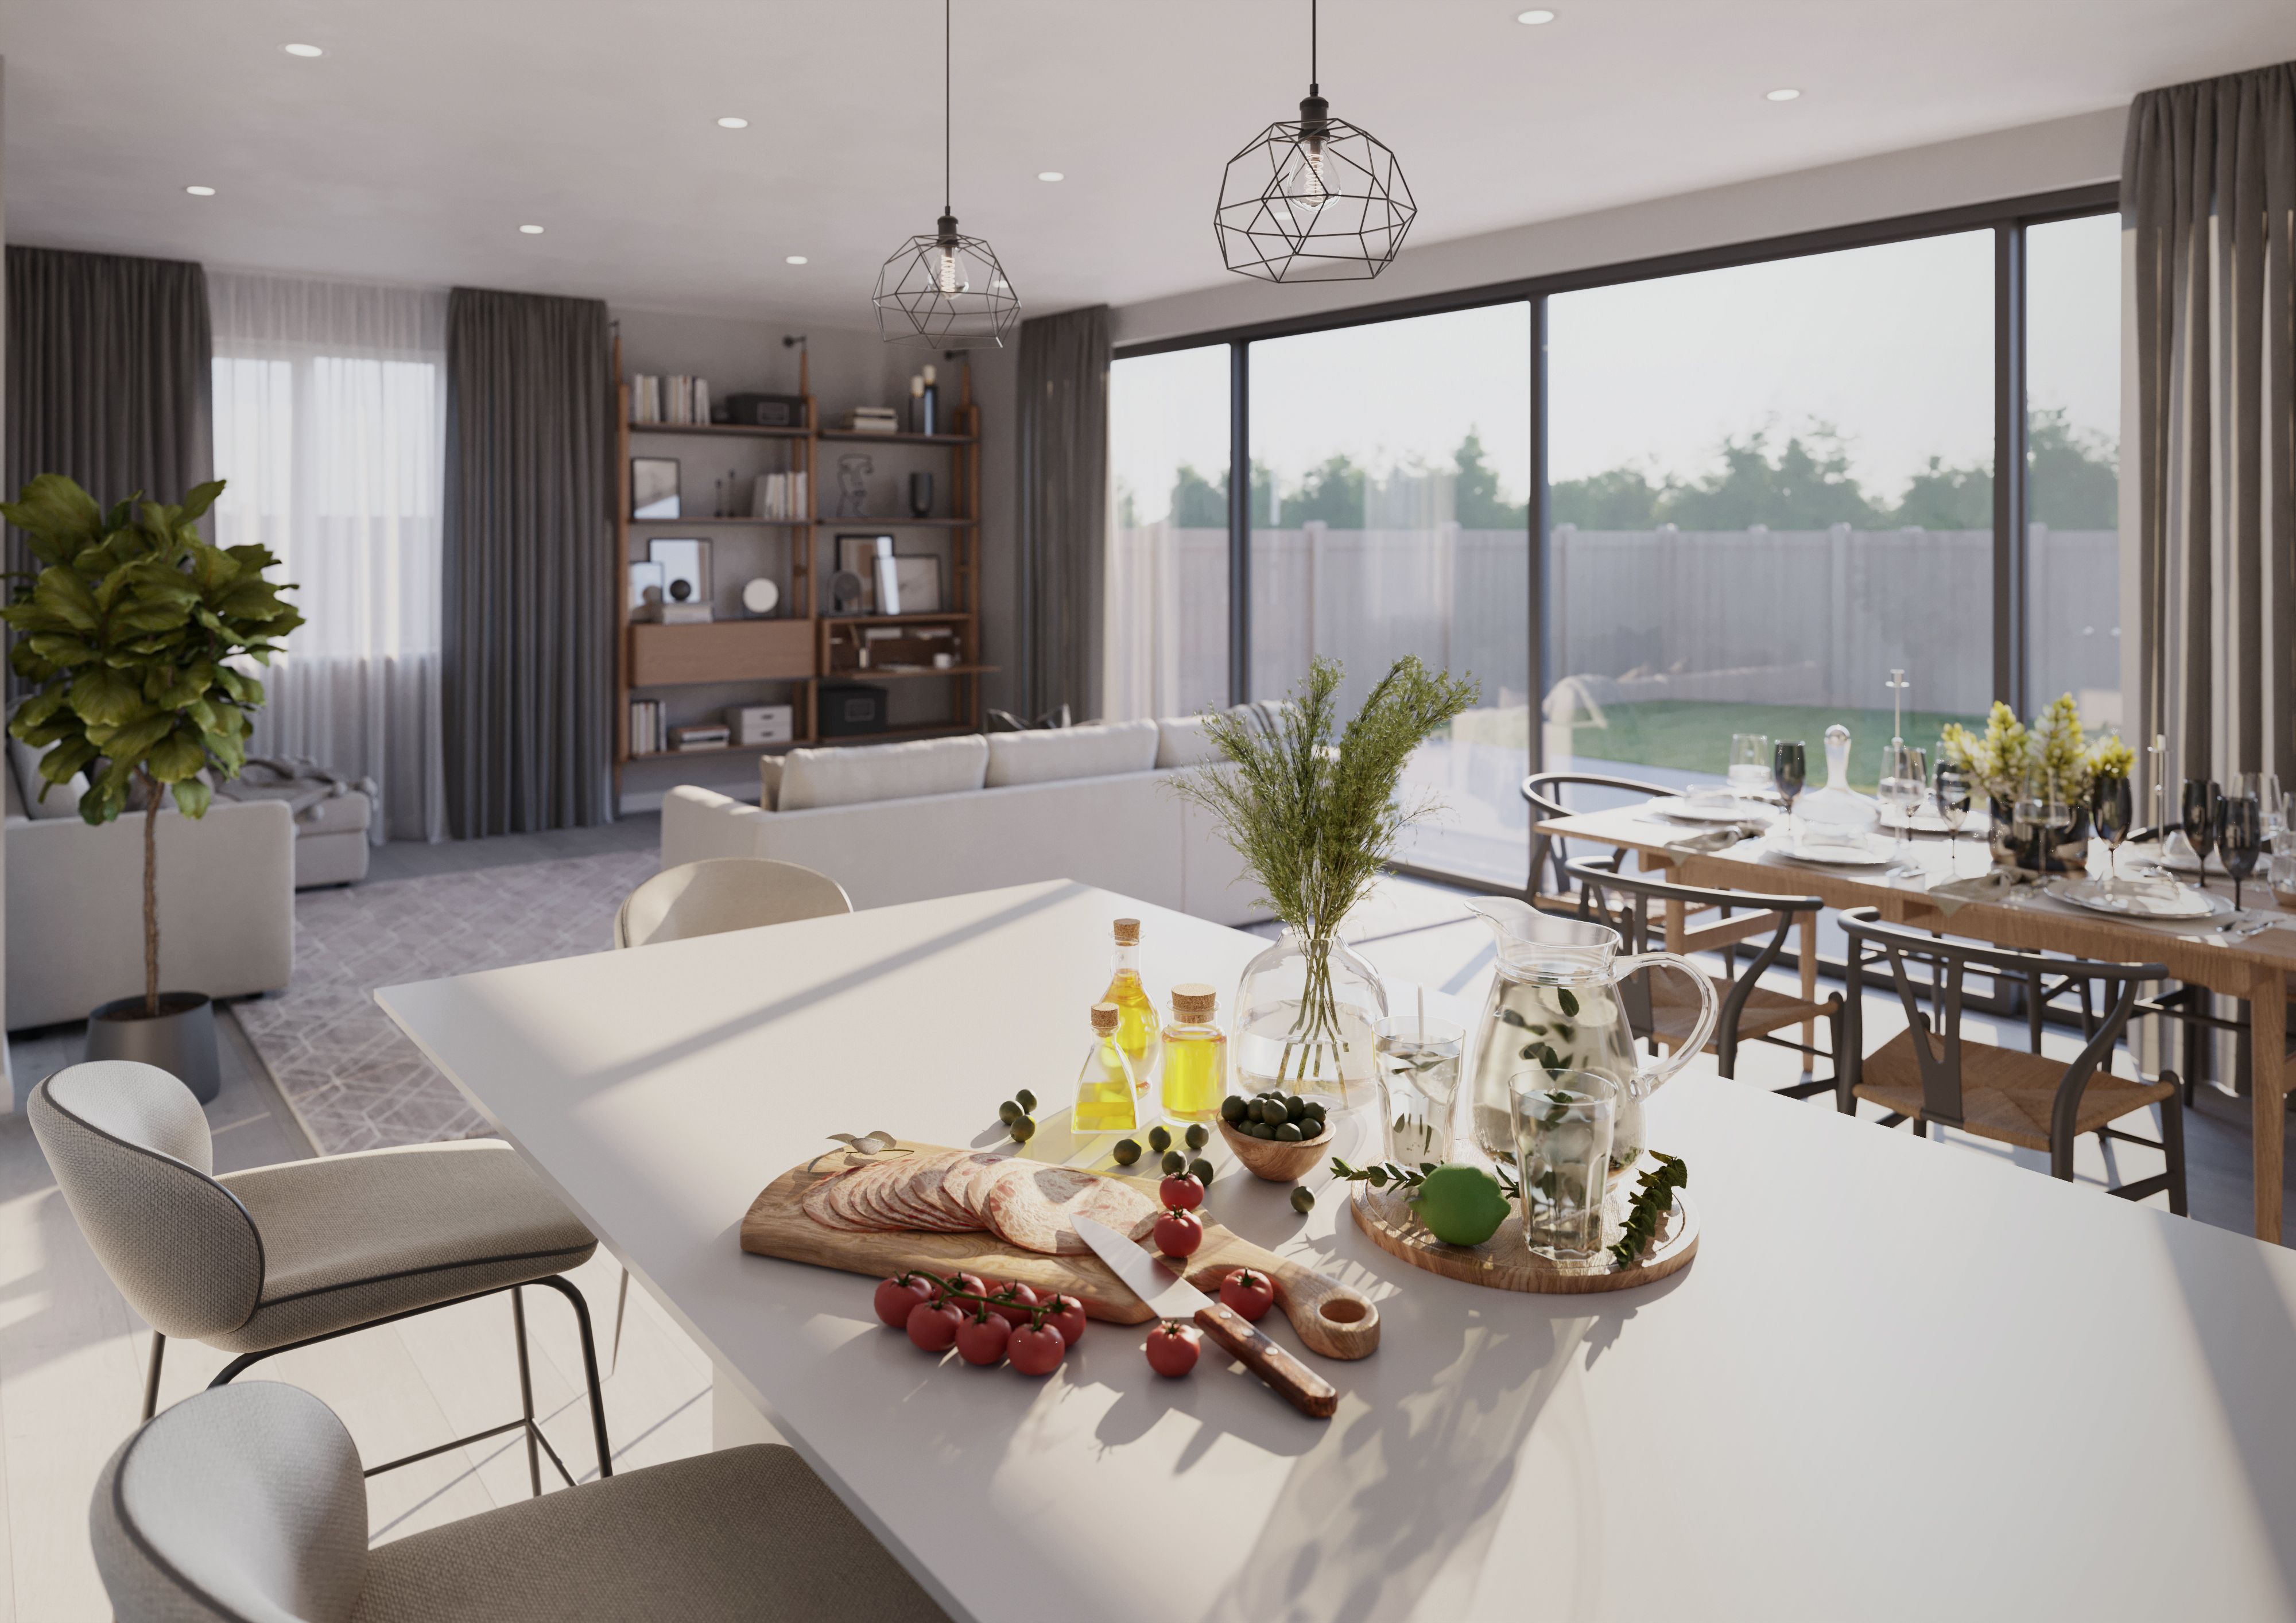 Lancaster Place is St Albans new housing development thats perfect for families image 2